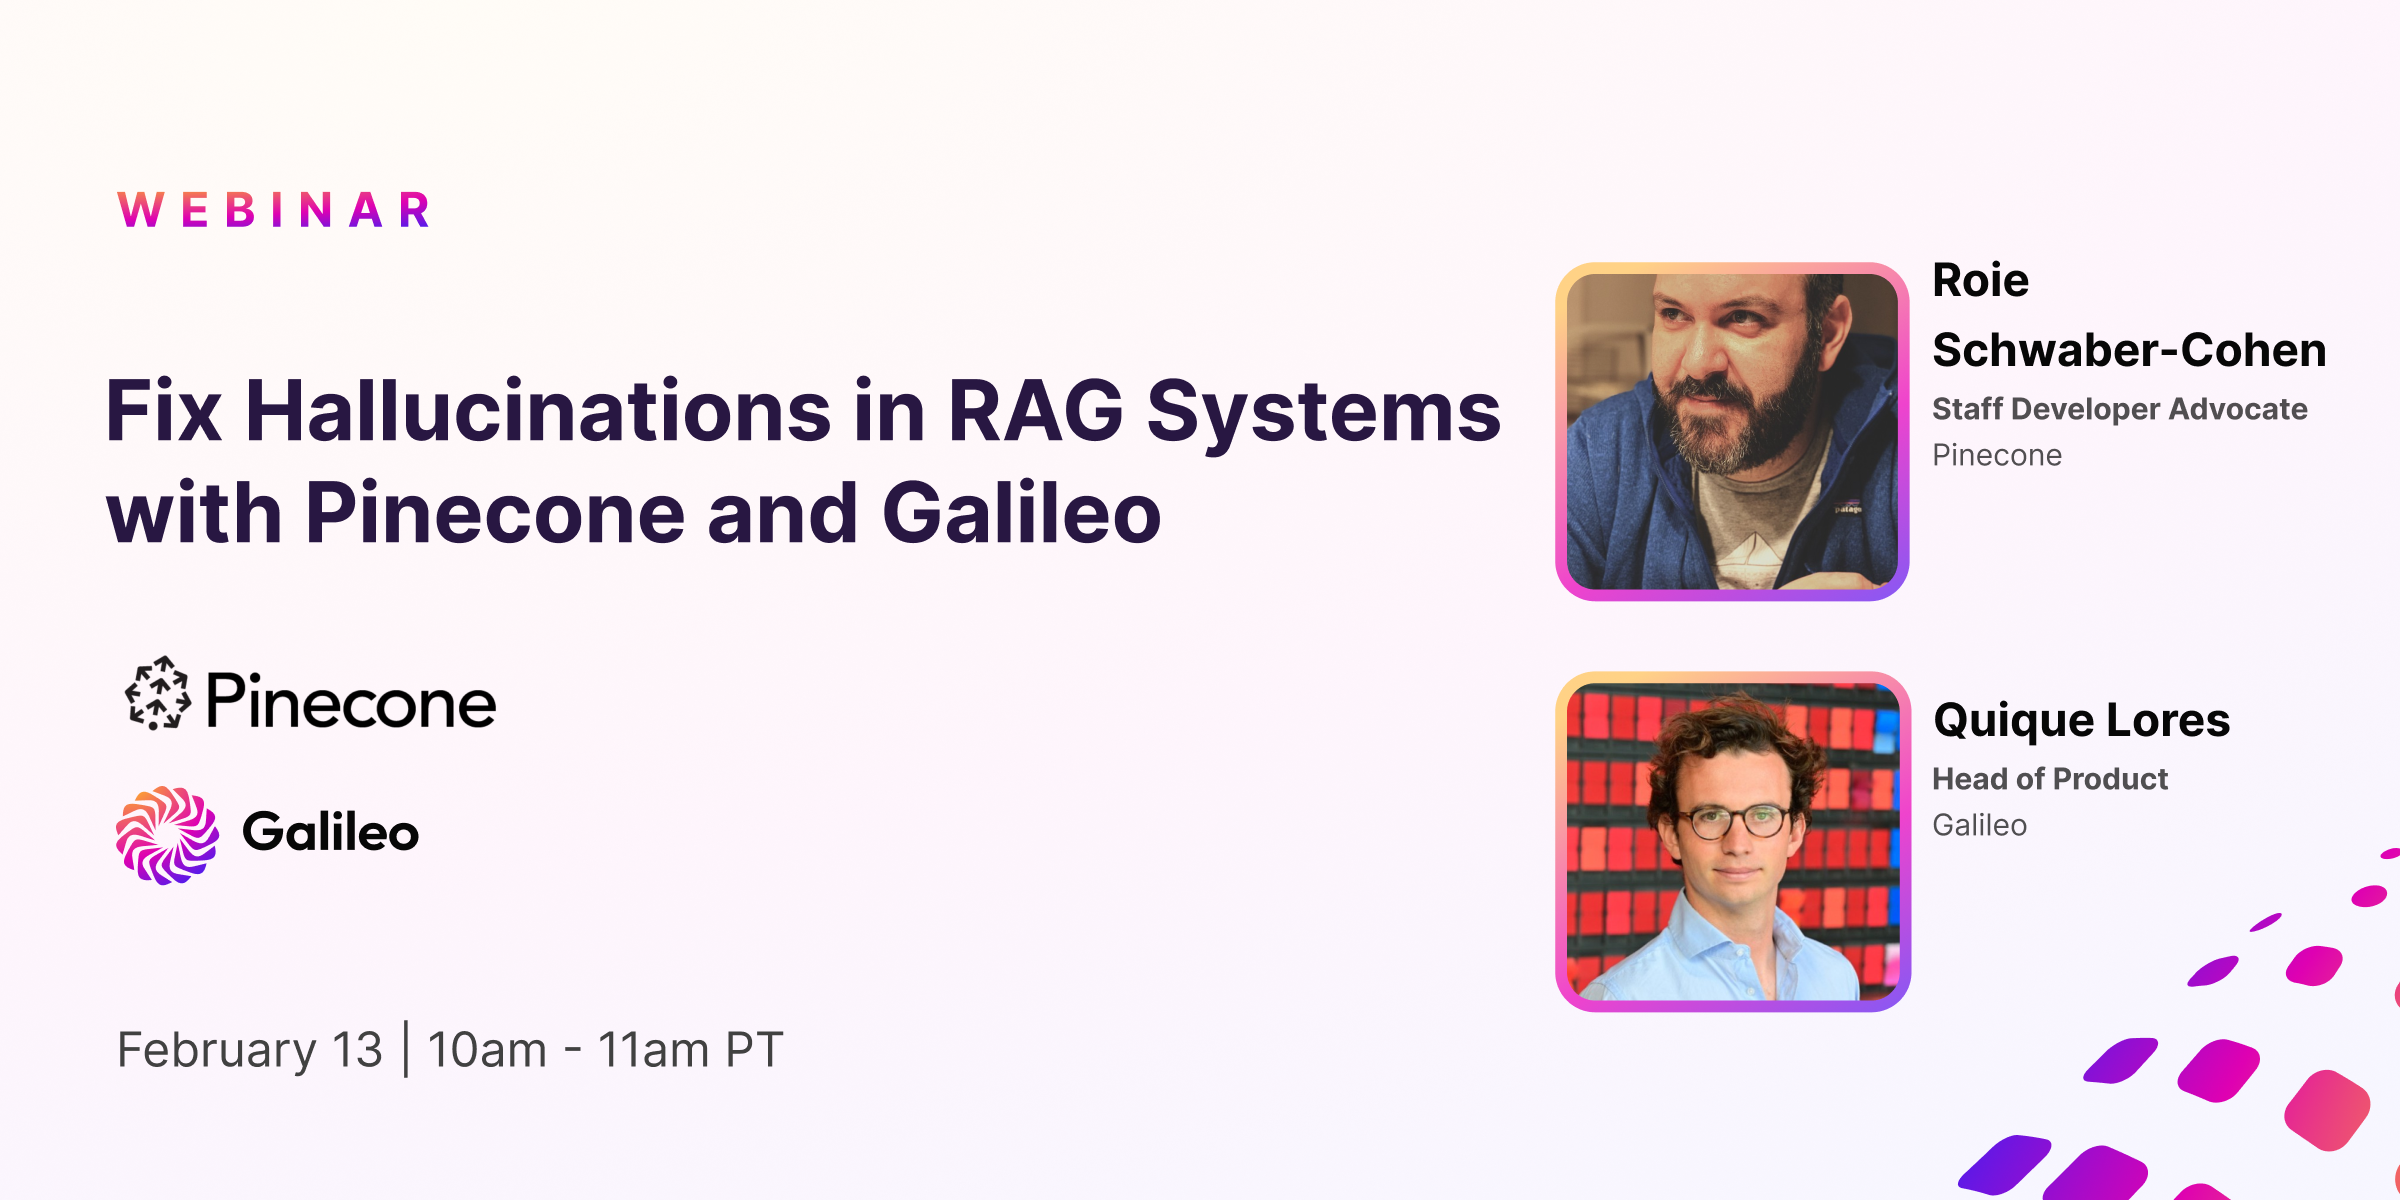 Webinar - Fix Hallucinations in RAG Systems with Pinecone and Galileo